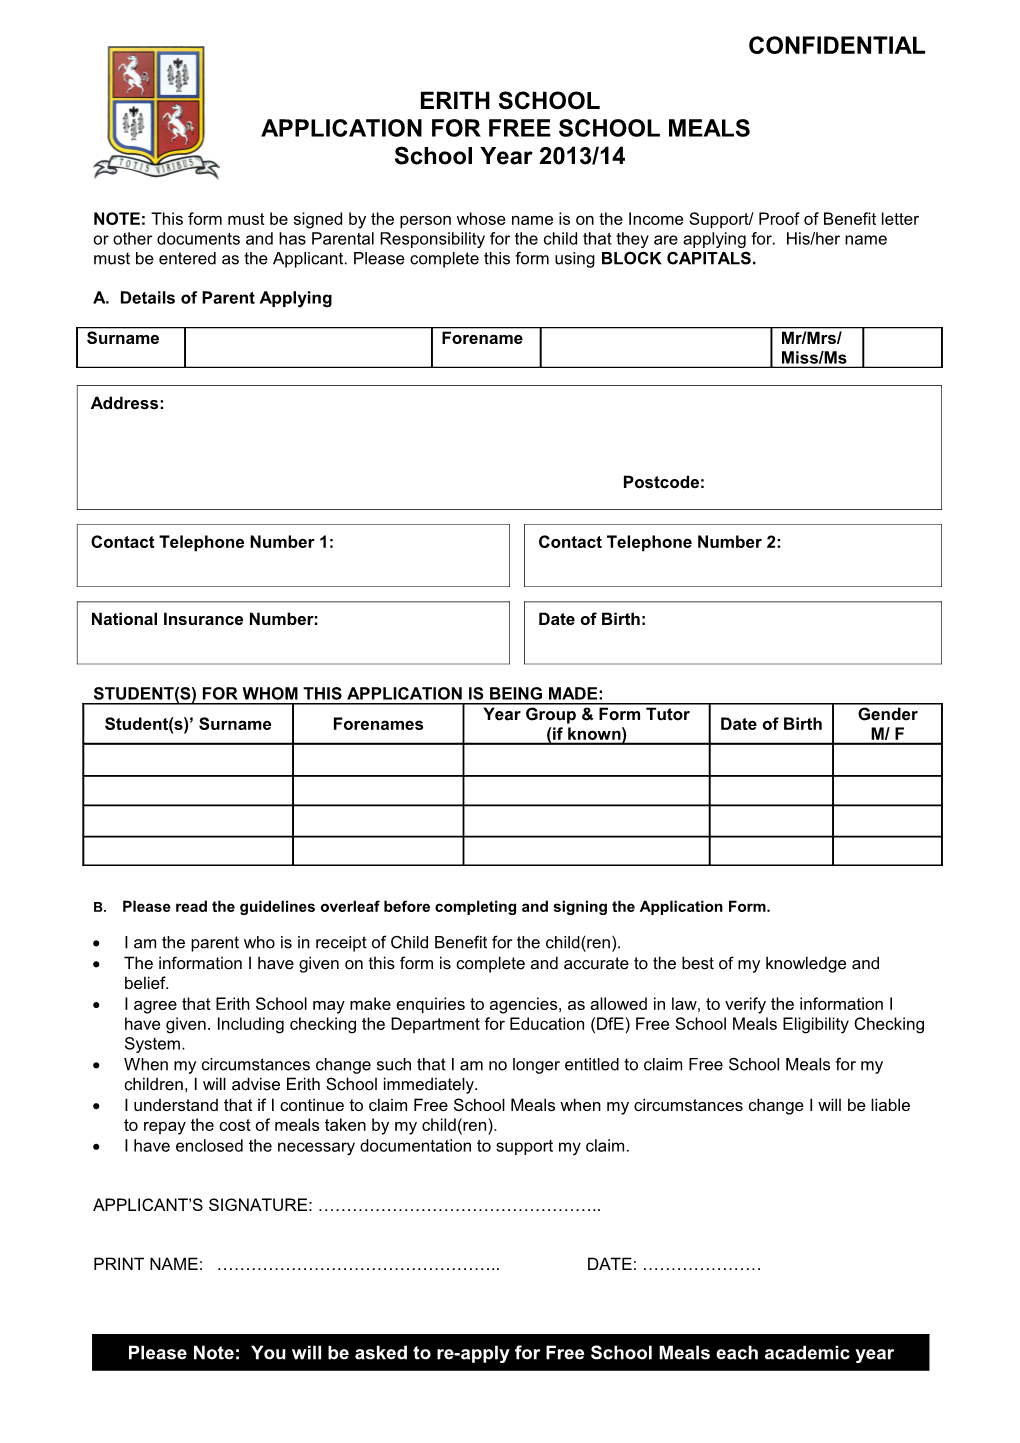 Application for Free School Meals